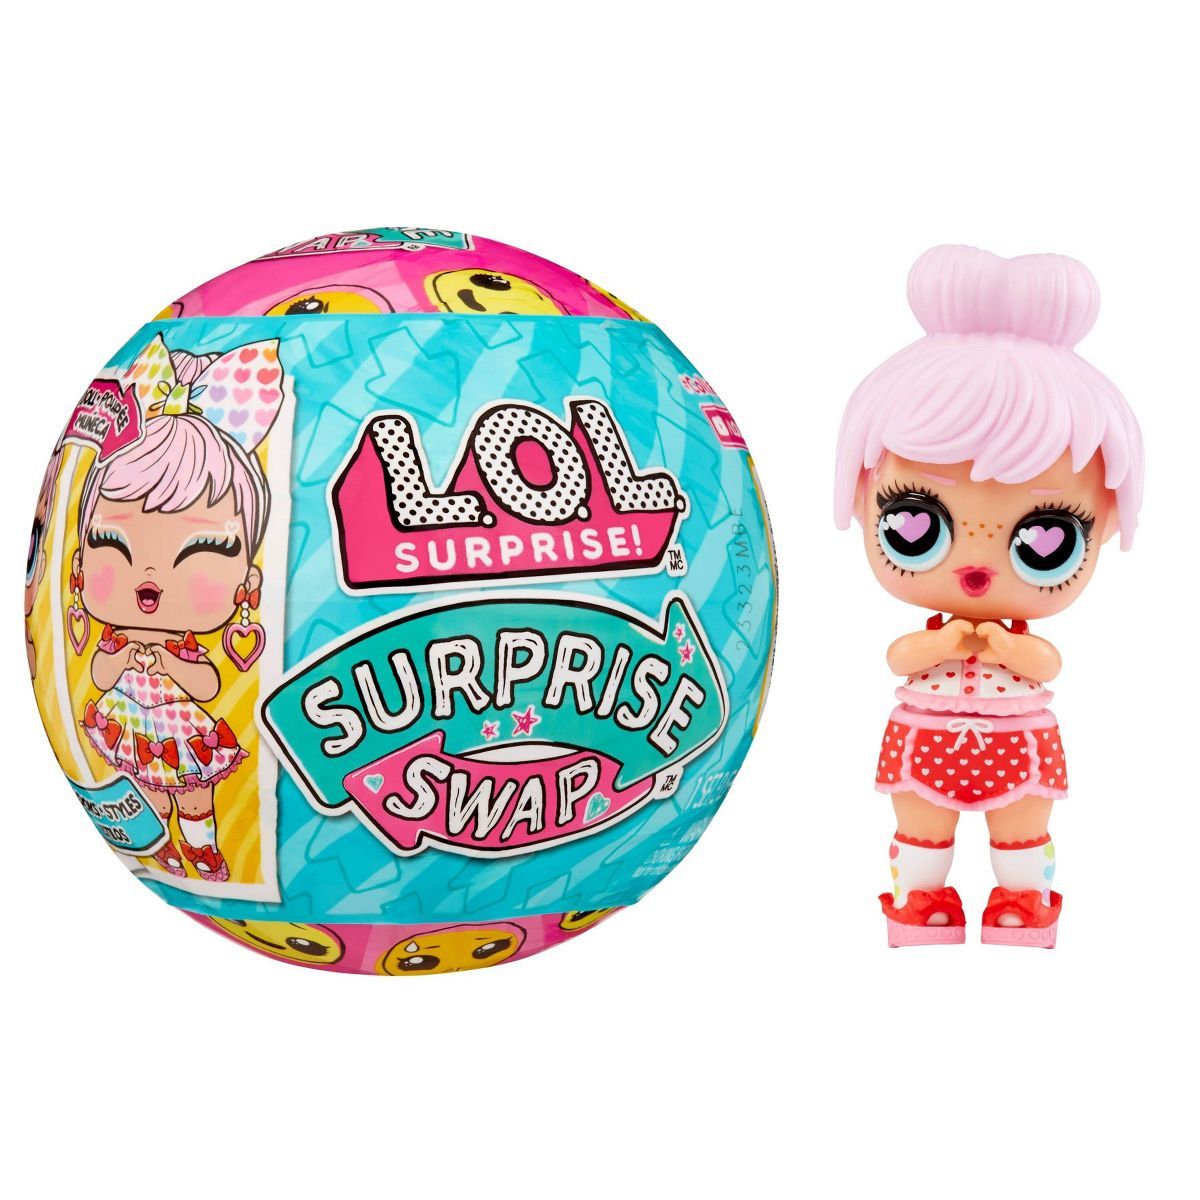 L.O.L. Surprise! Surprise Swap Tots with Collectible Doll Extra Expression 2 Looks in One | Target